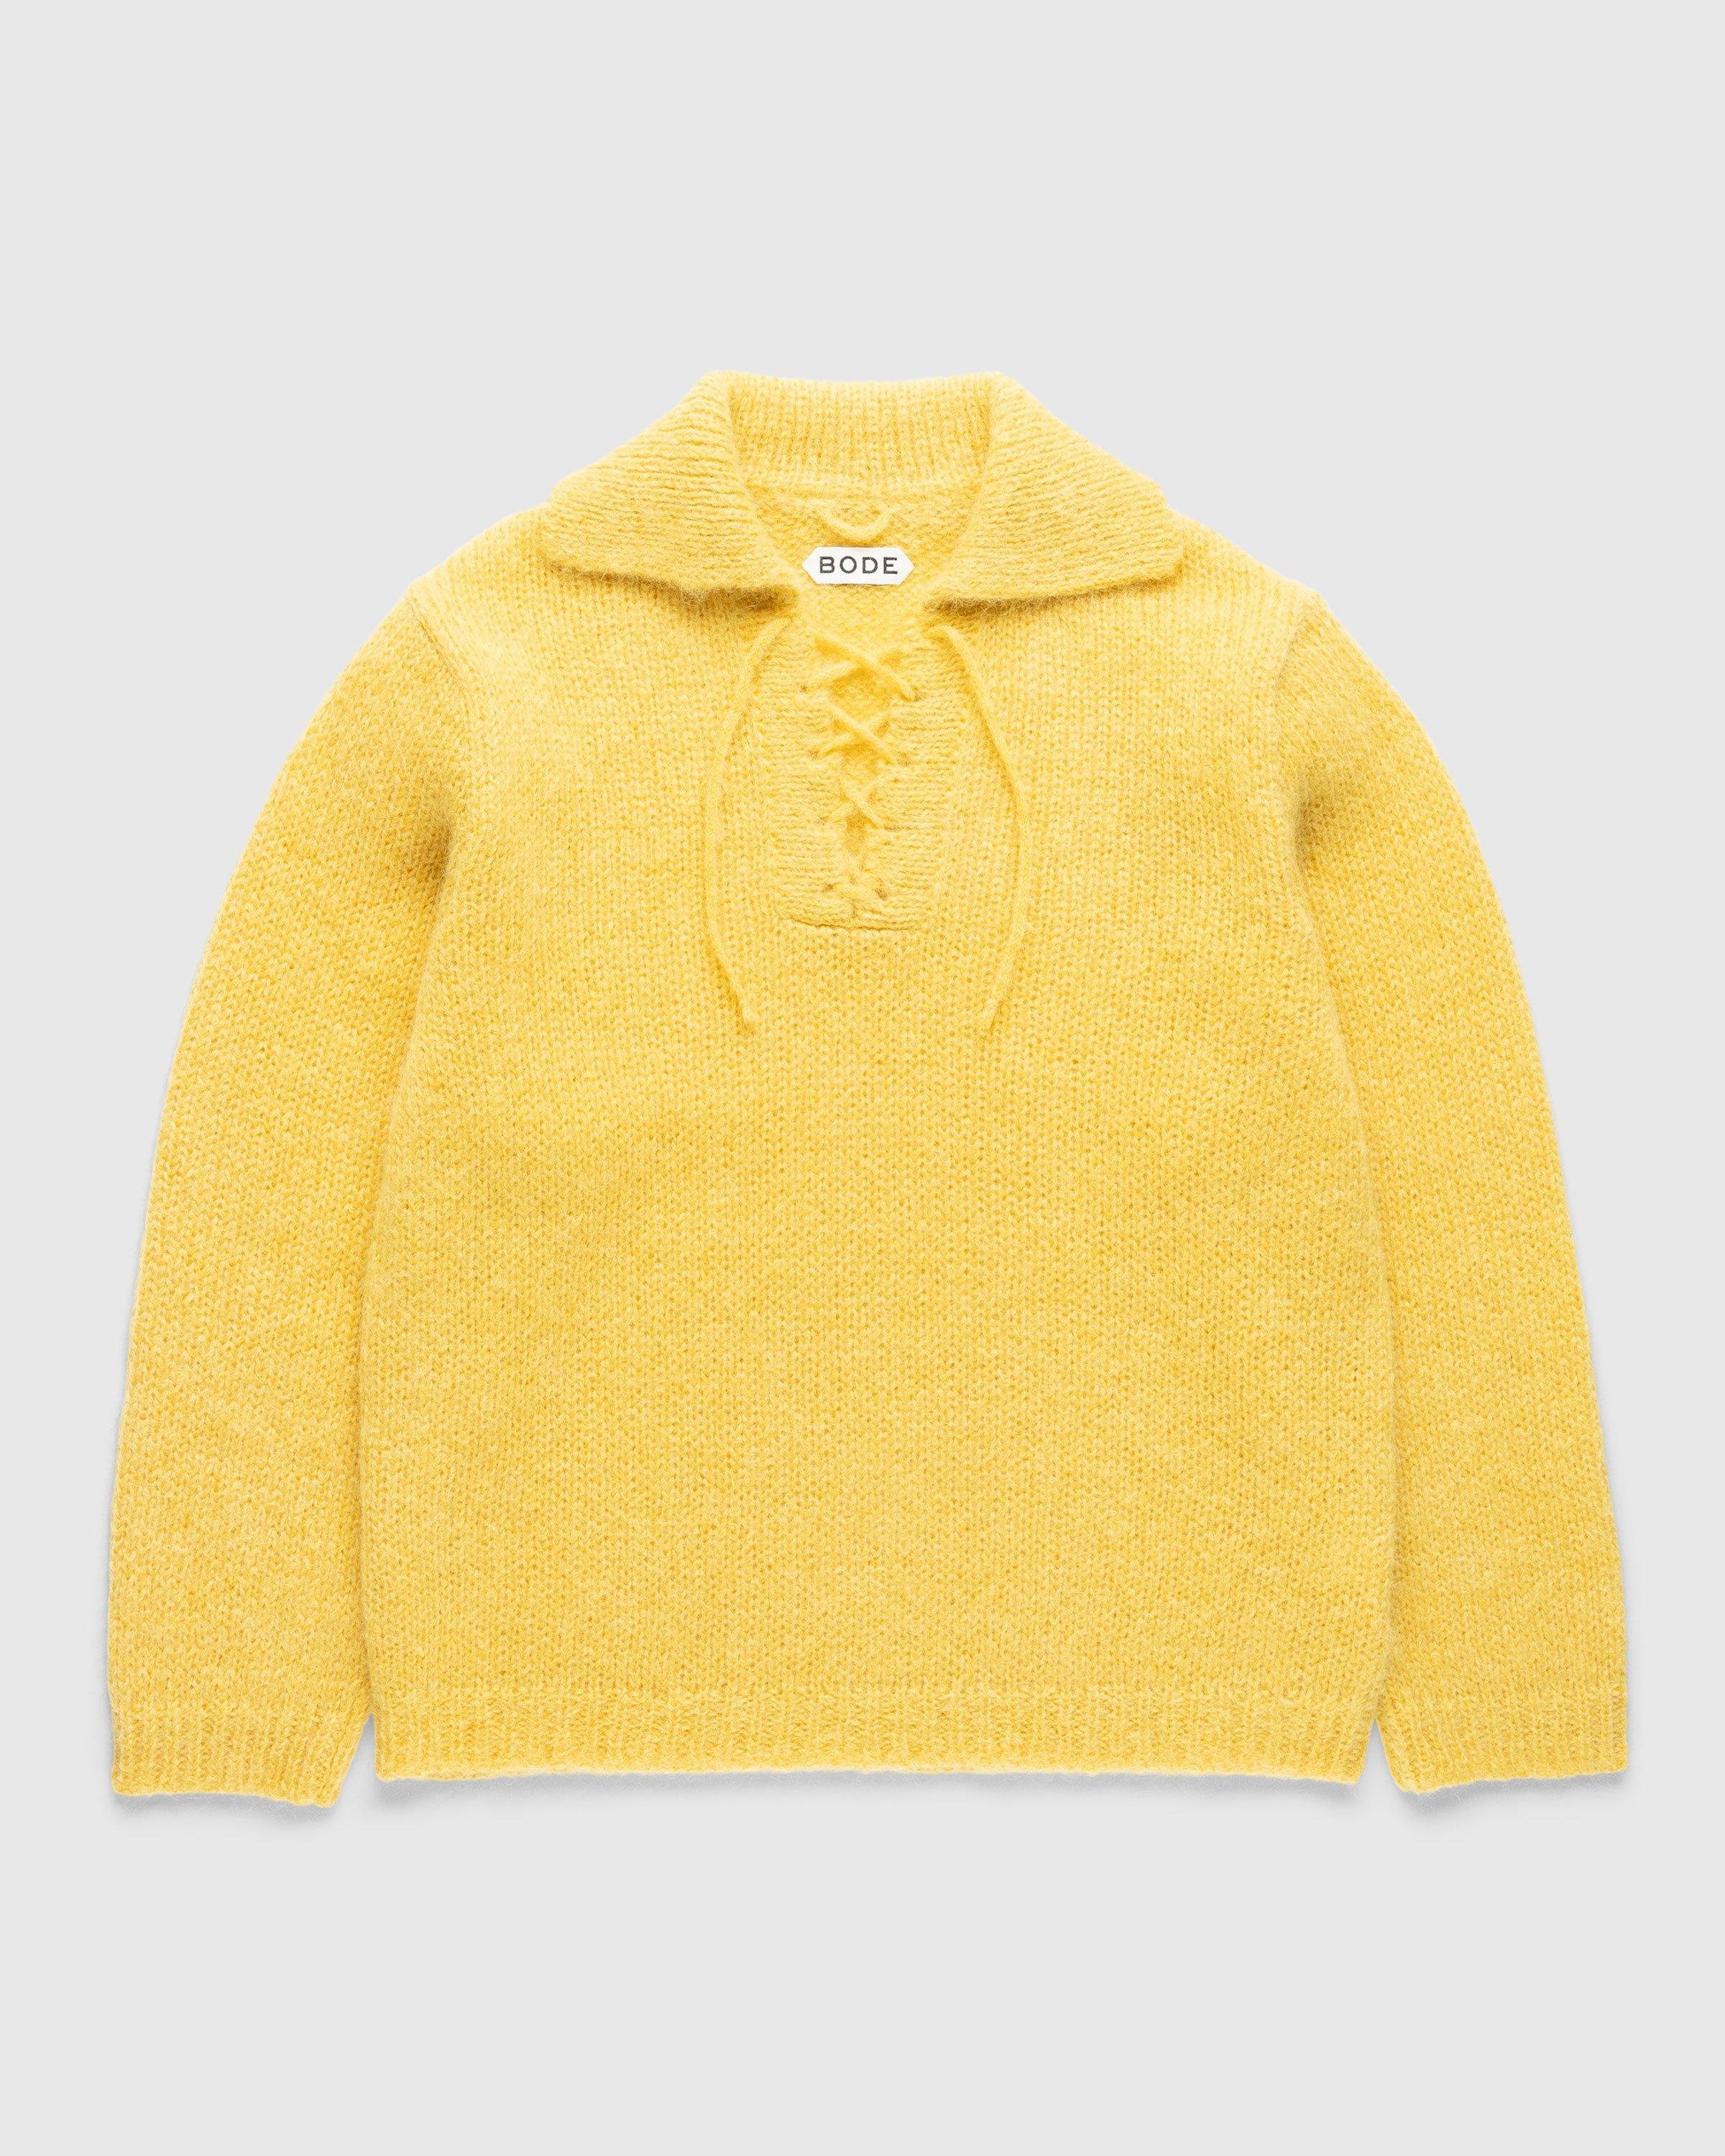 BodeAlpine Pullover Yellow by HIGHSNOBIETY